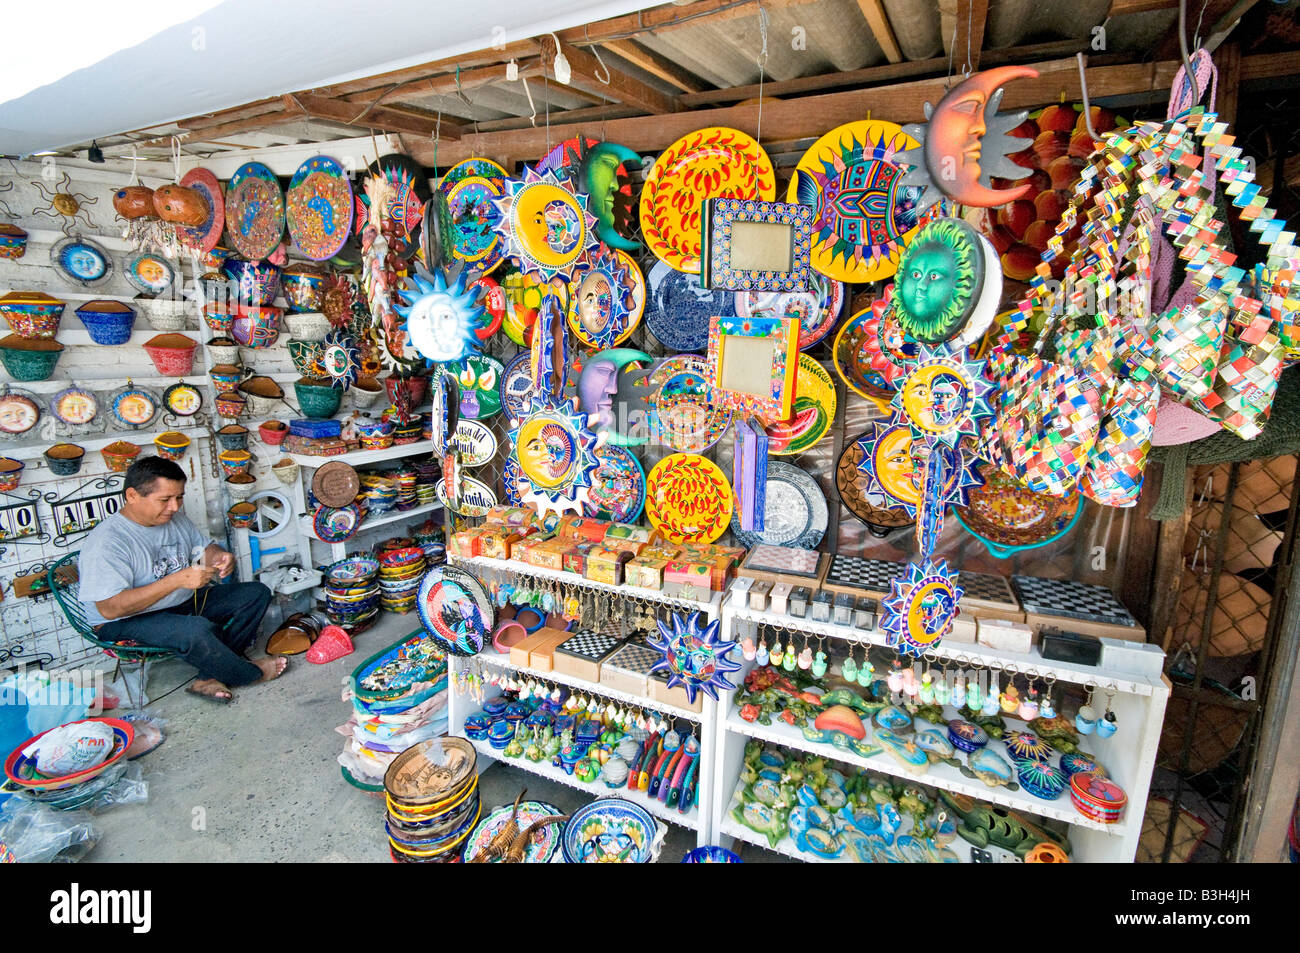 Local craft stores in Zihuatanejo, Mexico Stock Photo, Royalty Free